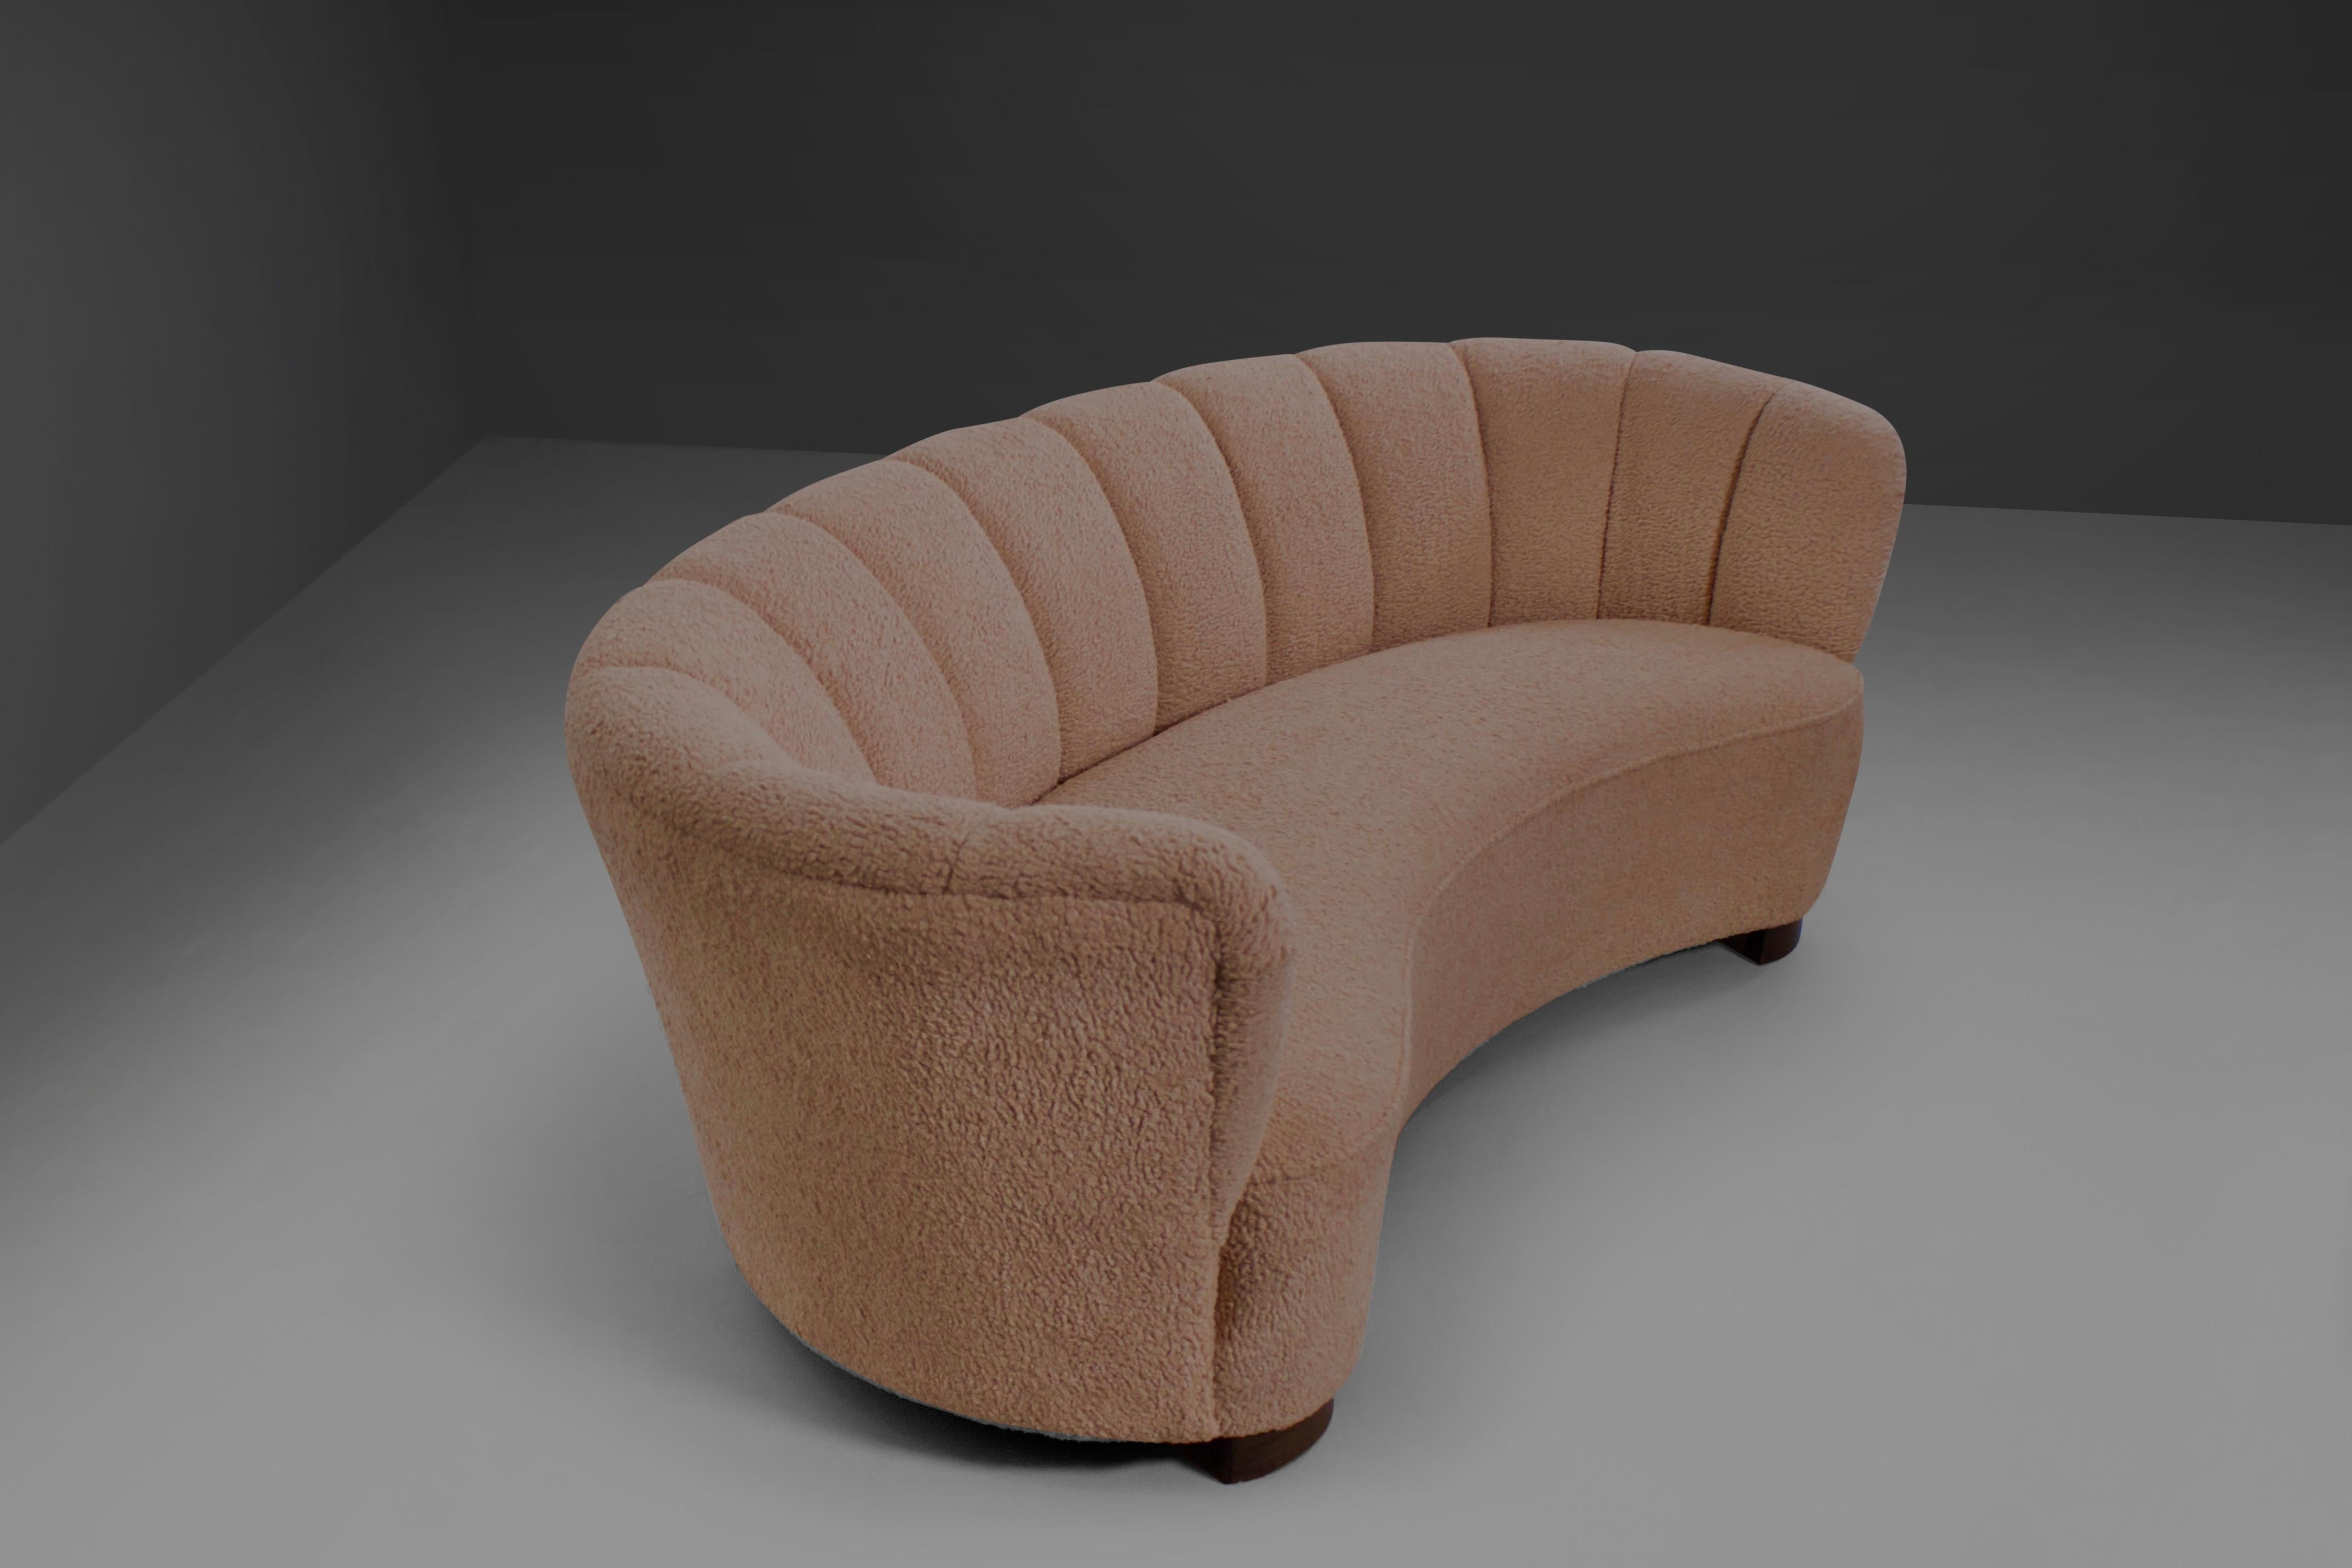 20th Century Danish Curved Banana Sofa in a Powder Pink Wool Fabric, 1940s For Sale